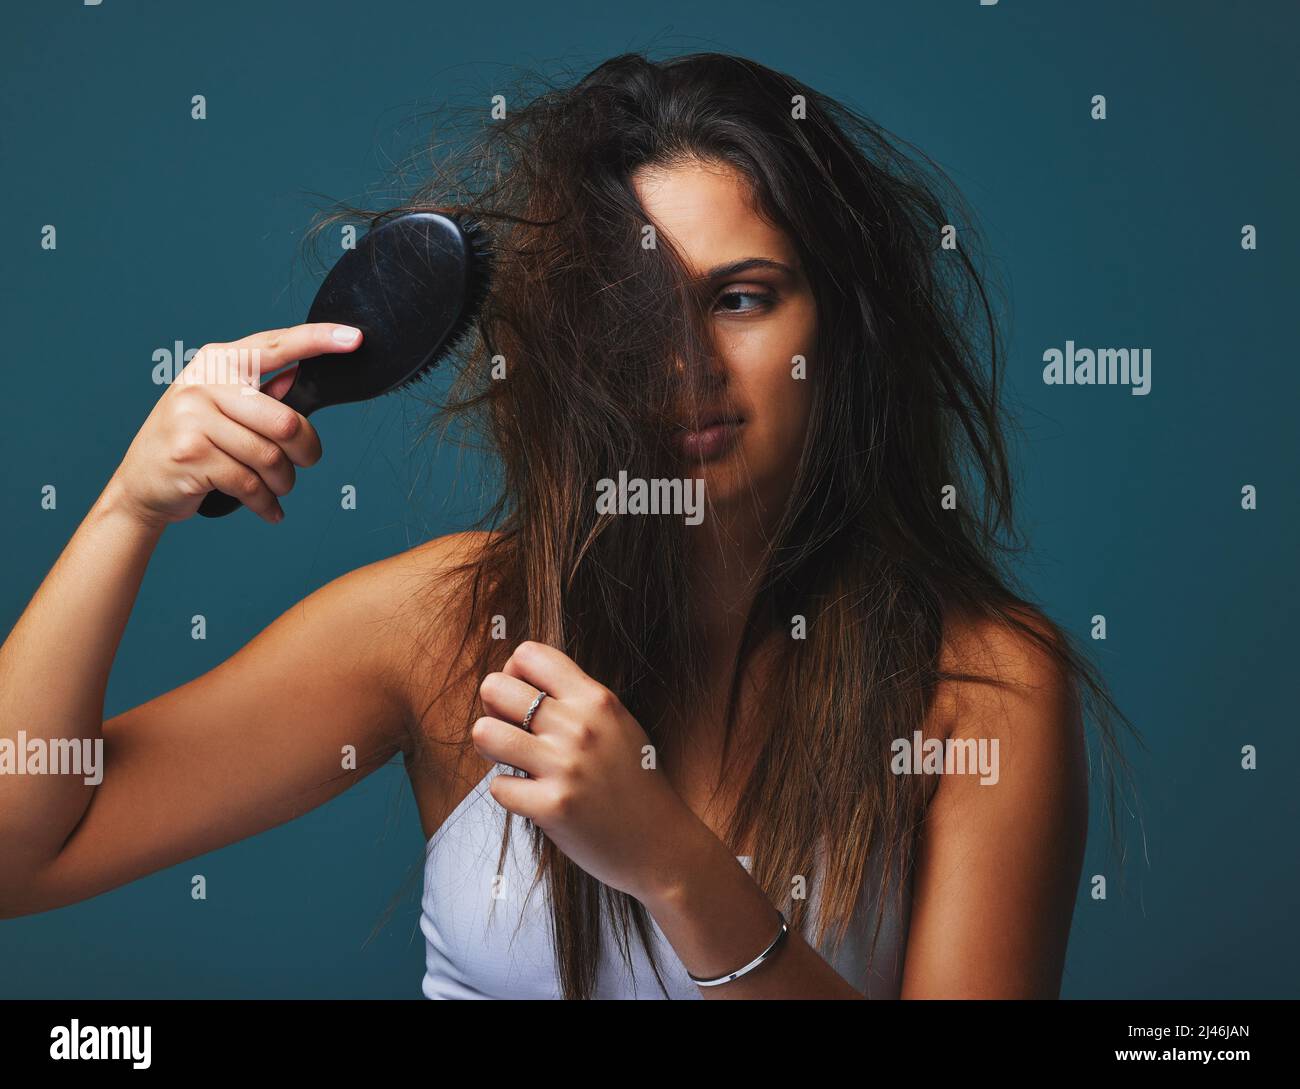 Its not just a hairstyle, its a state of mind. Studio shot of a beautiful young woman holding a brush to her hair posing against a blue background. Stock Photo